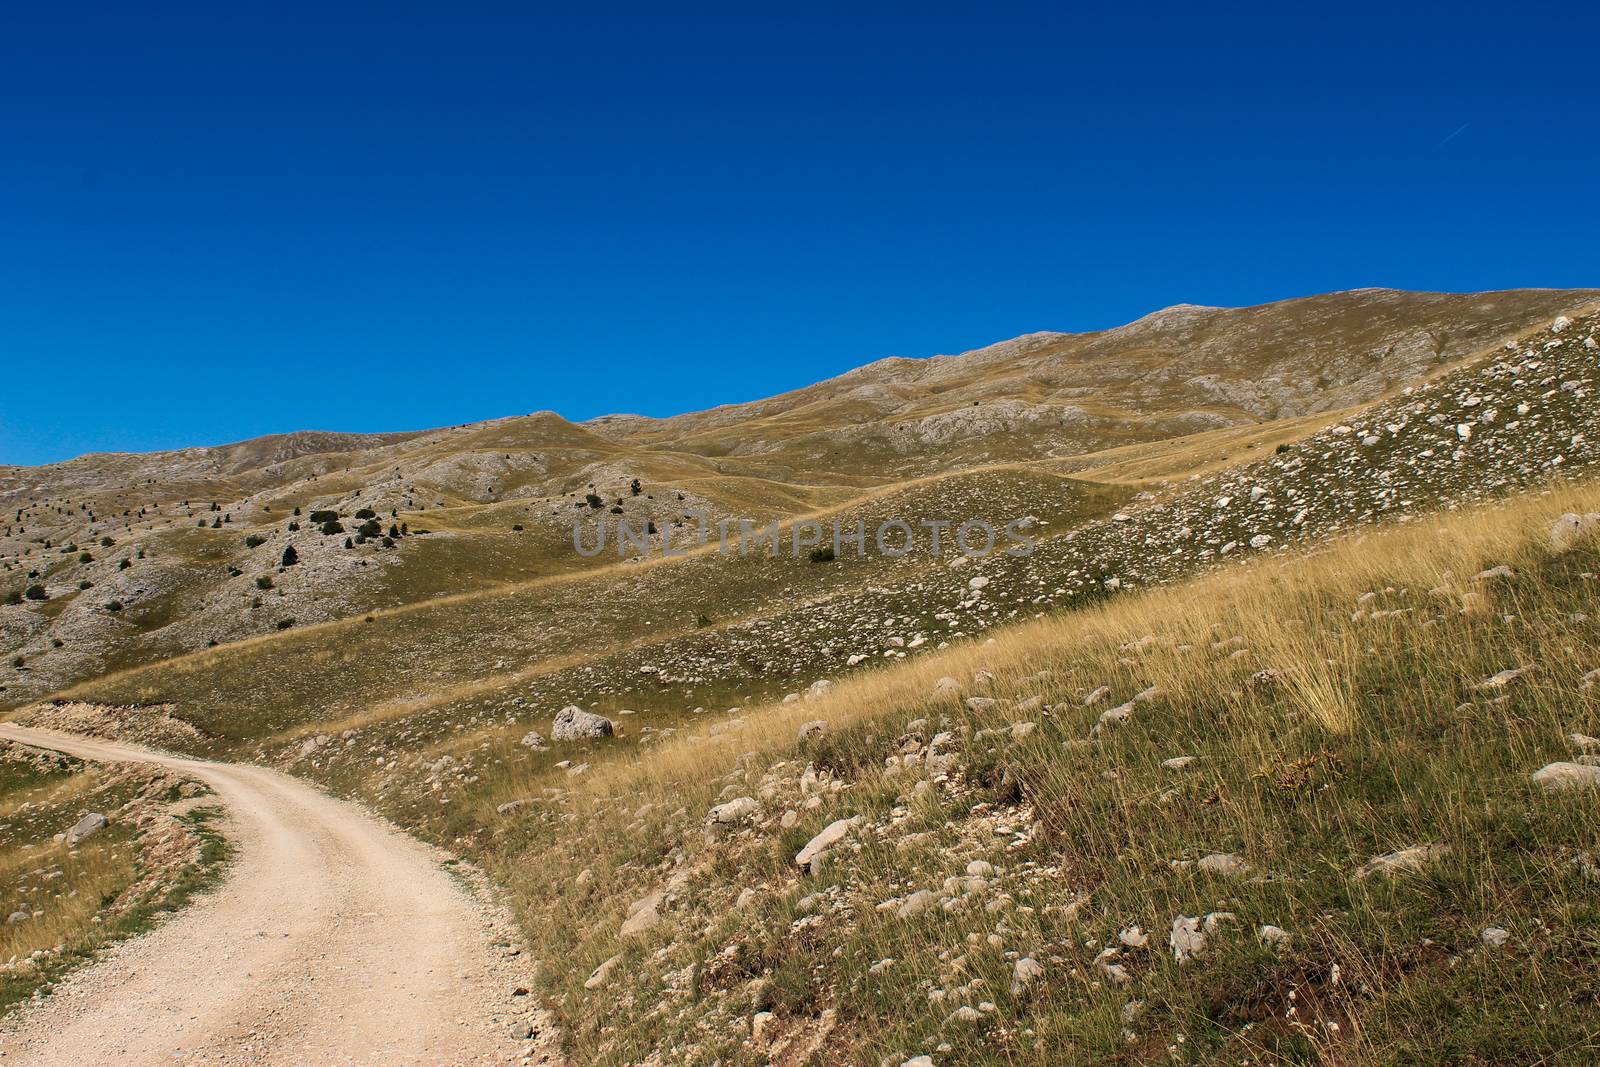 Mountain road on the mountain Bjelasnica, rocky landscape in autumn. Bjelasnica Mountain, Bosnia and Herzegovina. by mahirrov